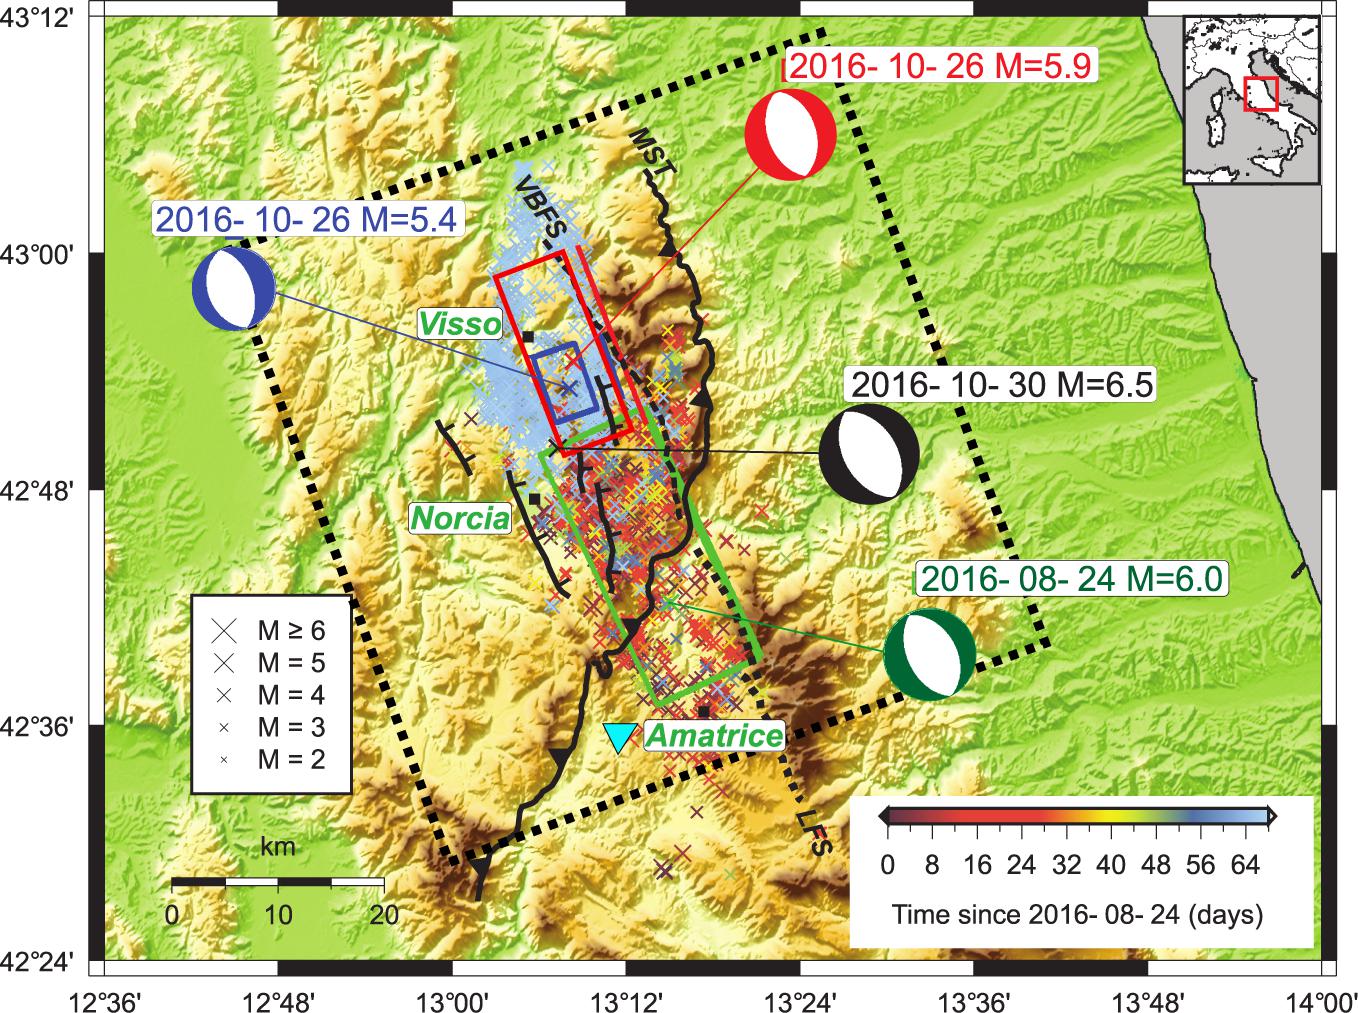 Frontiers Fluid Triggered Aftershocks In An Anisotropic Hydraulic Conductivity Geological Complex The Case Of The 16 Amatrice Sequence Italy Earth Science